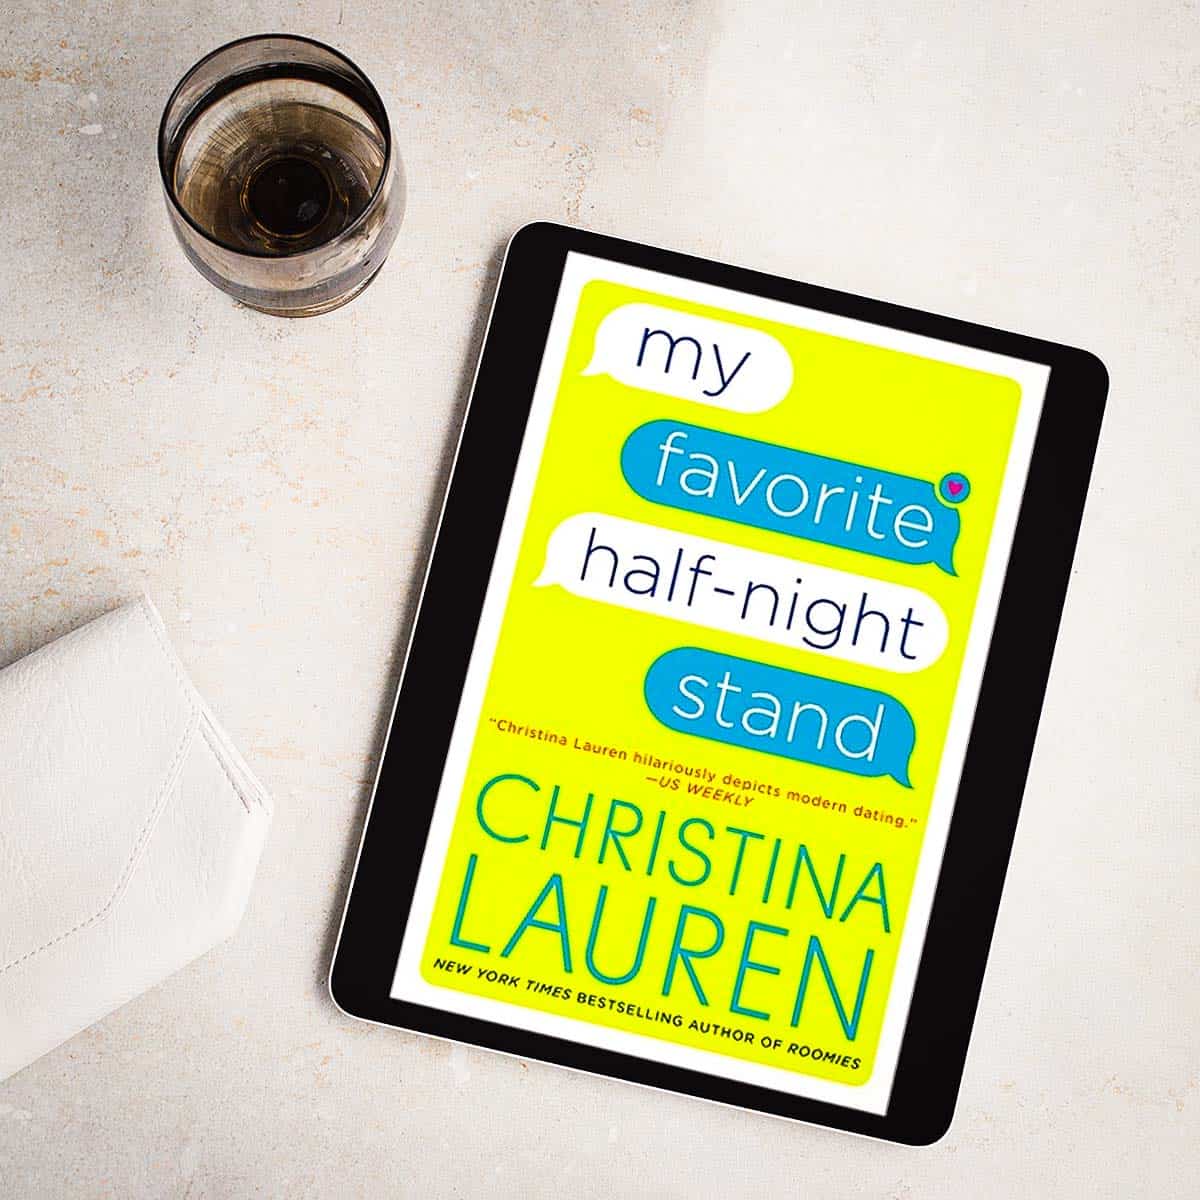 My Favorite Half-Night Stand by Christina Lauren is a smartly written and quirky contemporary romance about the perils of online dating while being in love with your best friend.